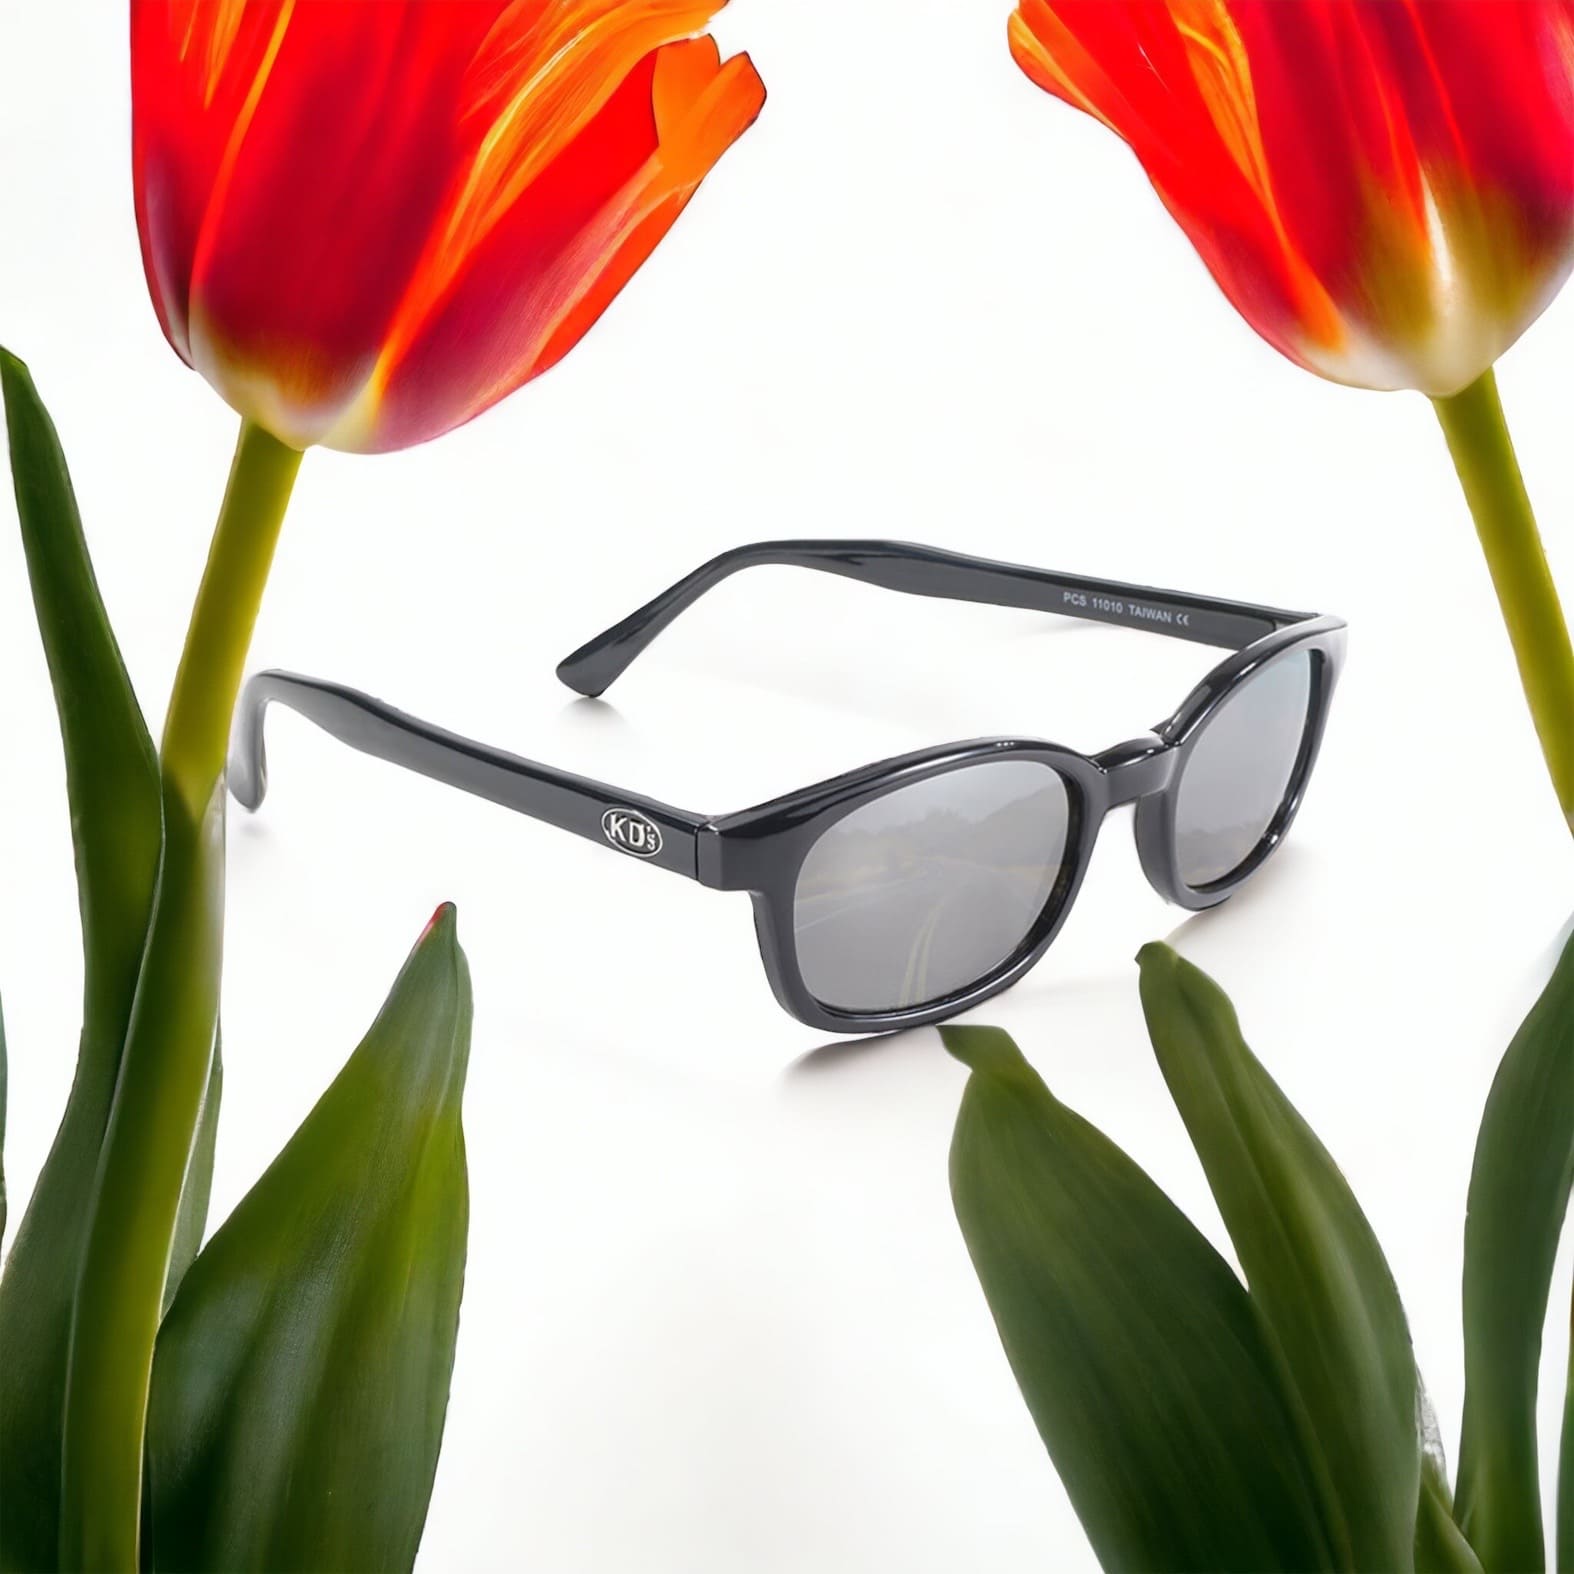 X-KD's 11010 large sunglasses for outdoor activities with a sleek, rugged black frame and silver polycarbonate mirror lenses set in front of tulips.